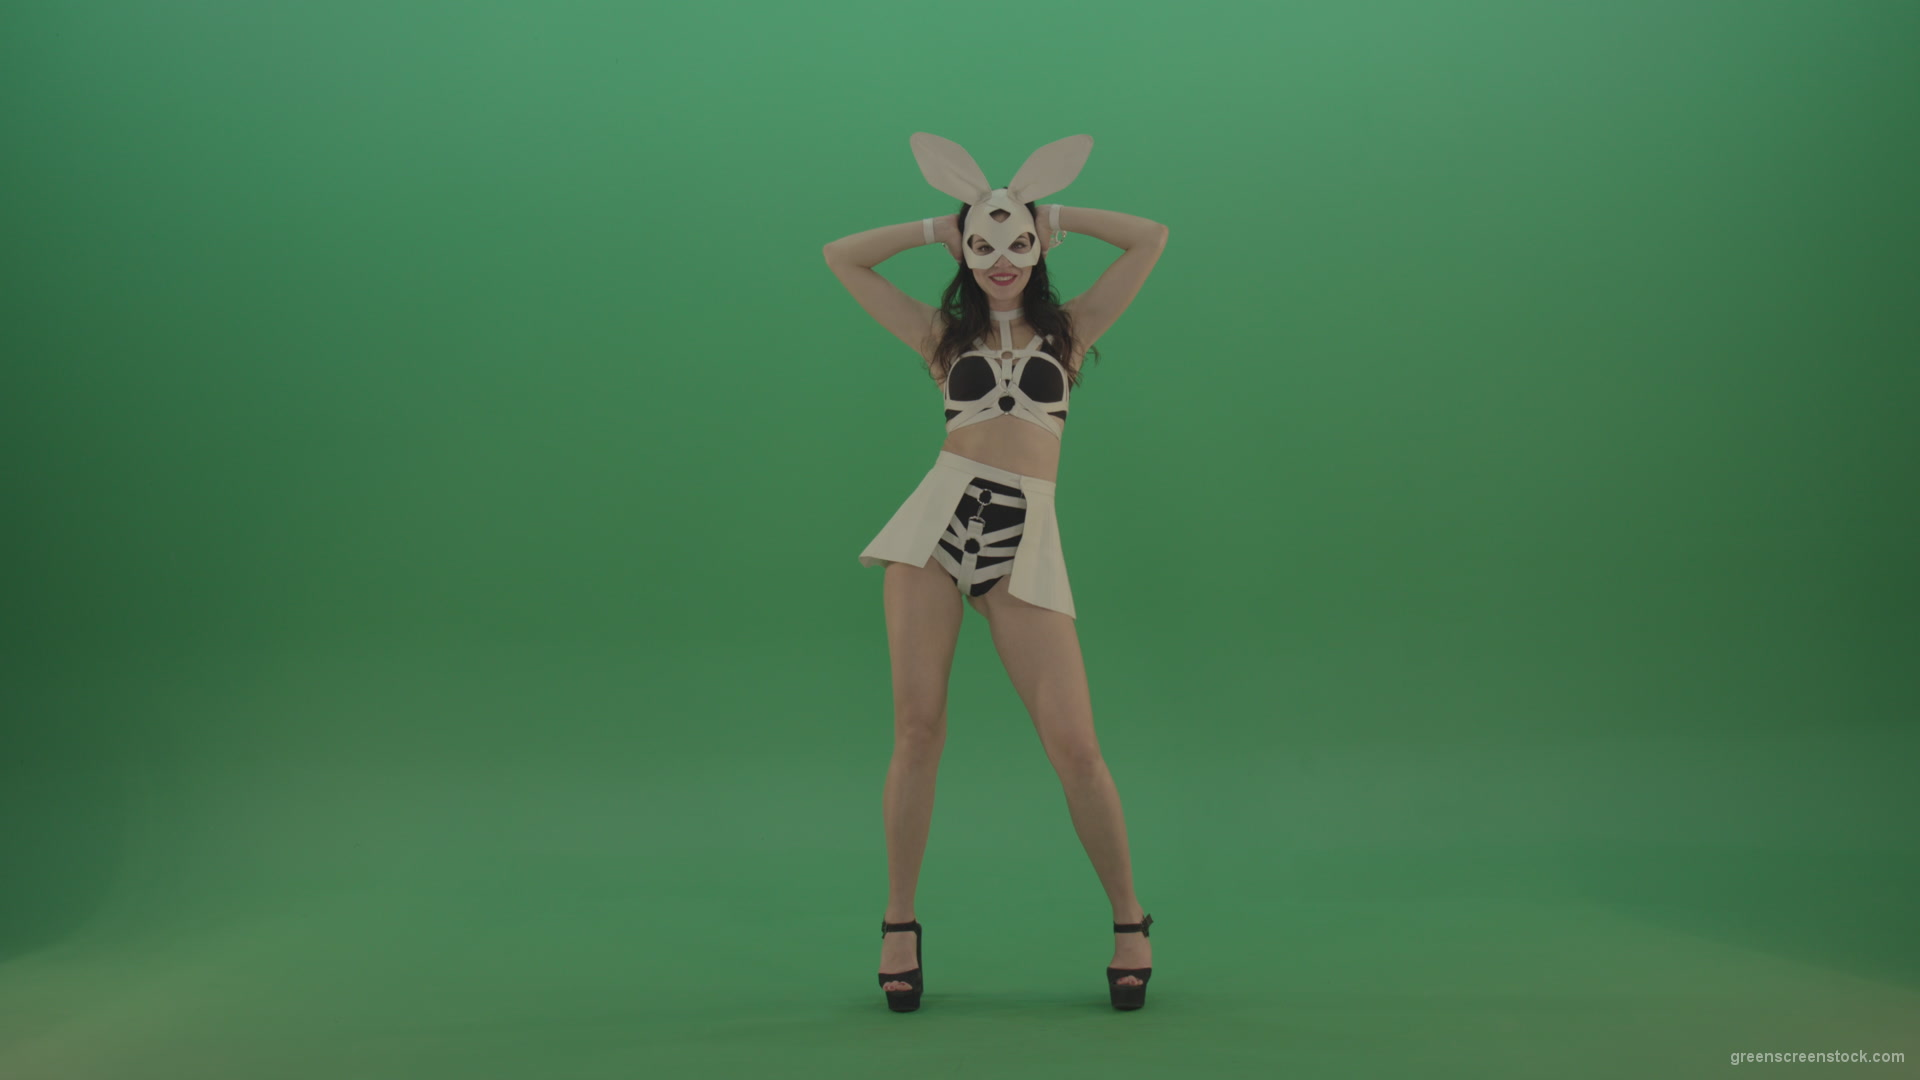 Black-white-sexy-costume-the-girl-moves-the-basin-in-different-directions-on-chromakey-background_001 Green Screen Stock